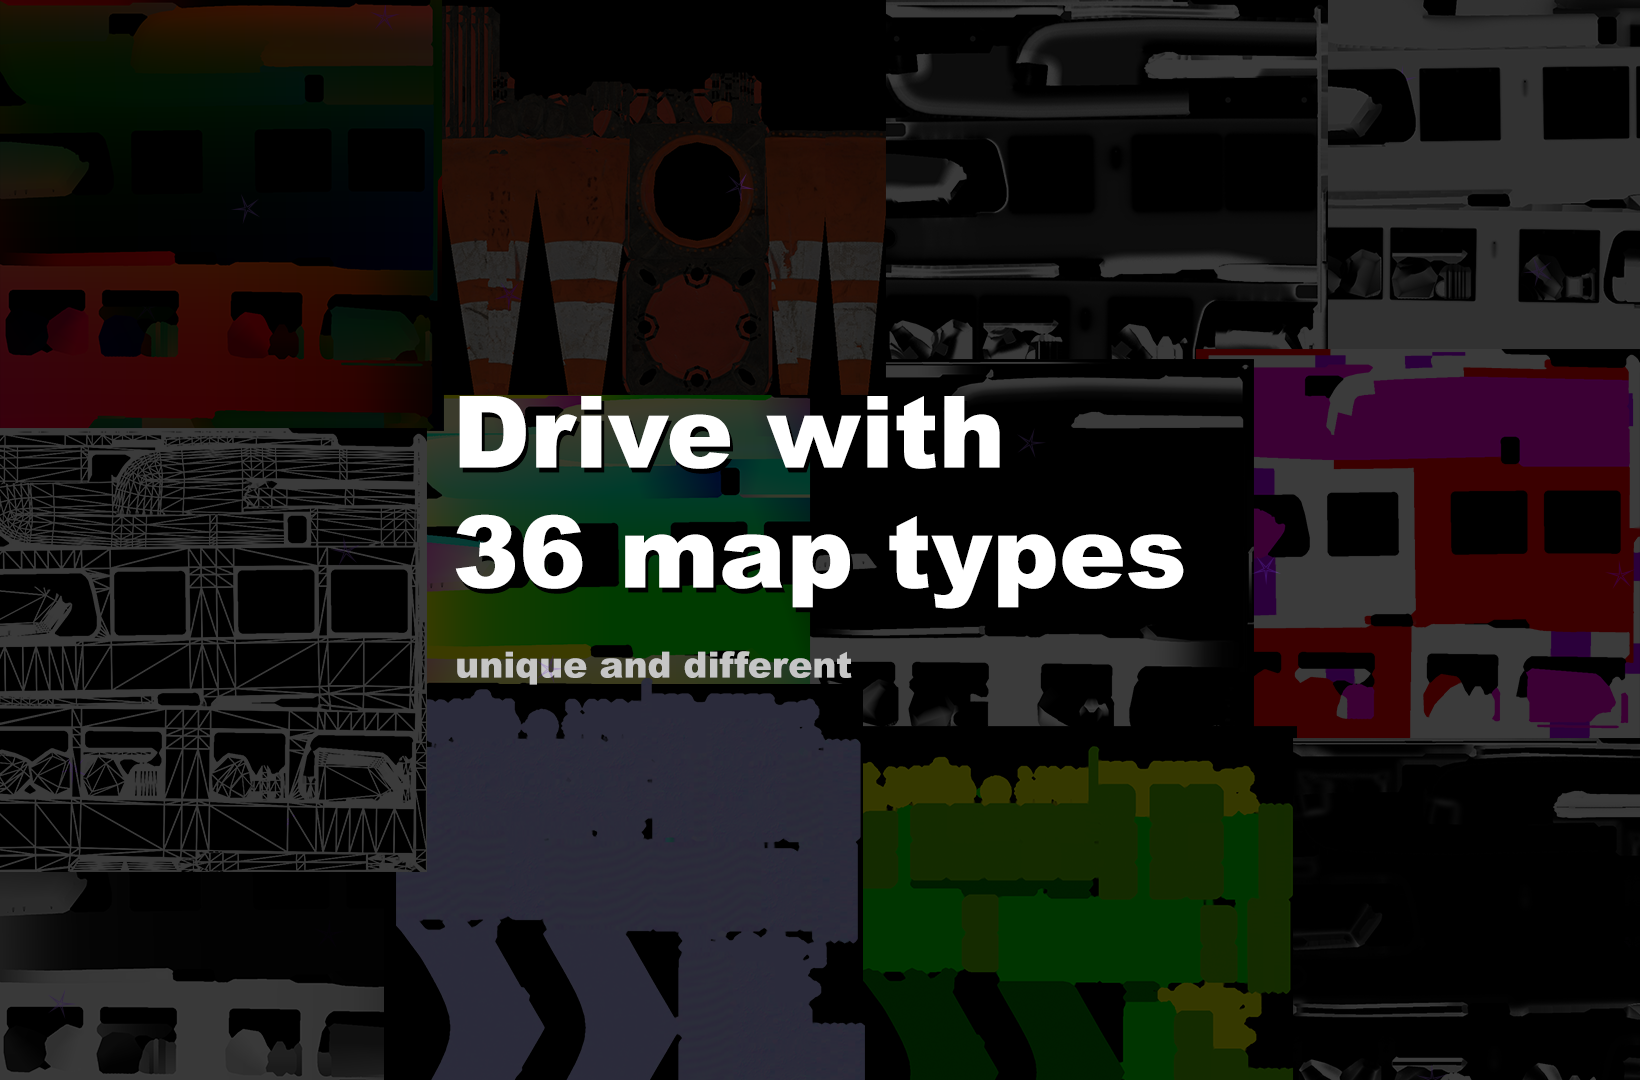 Drive with 36 different map types